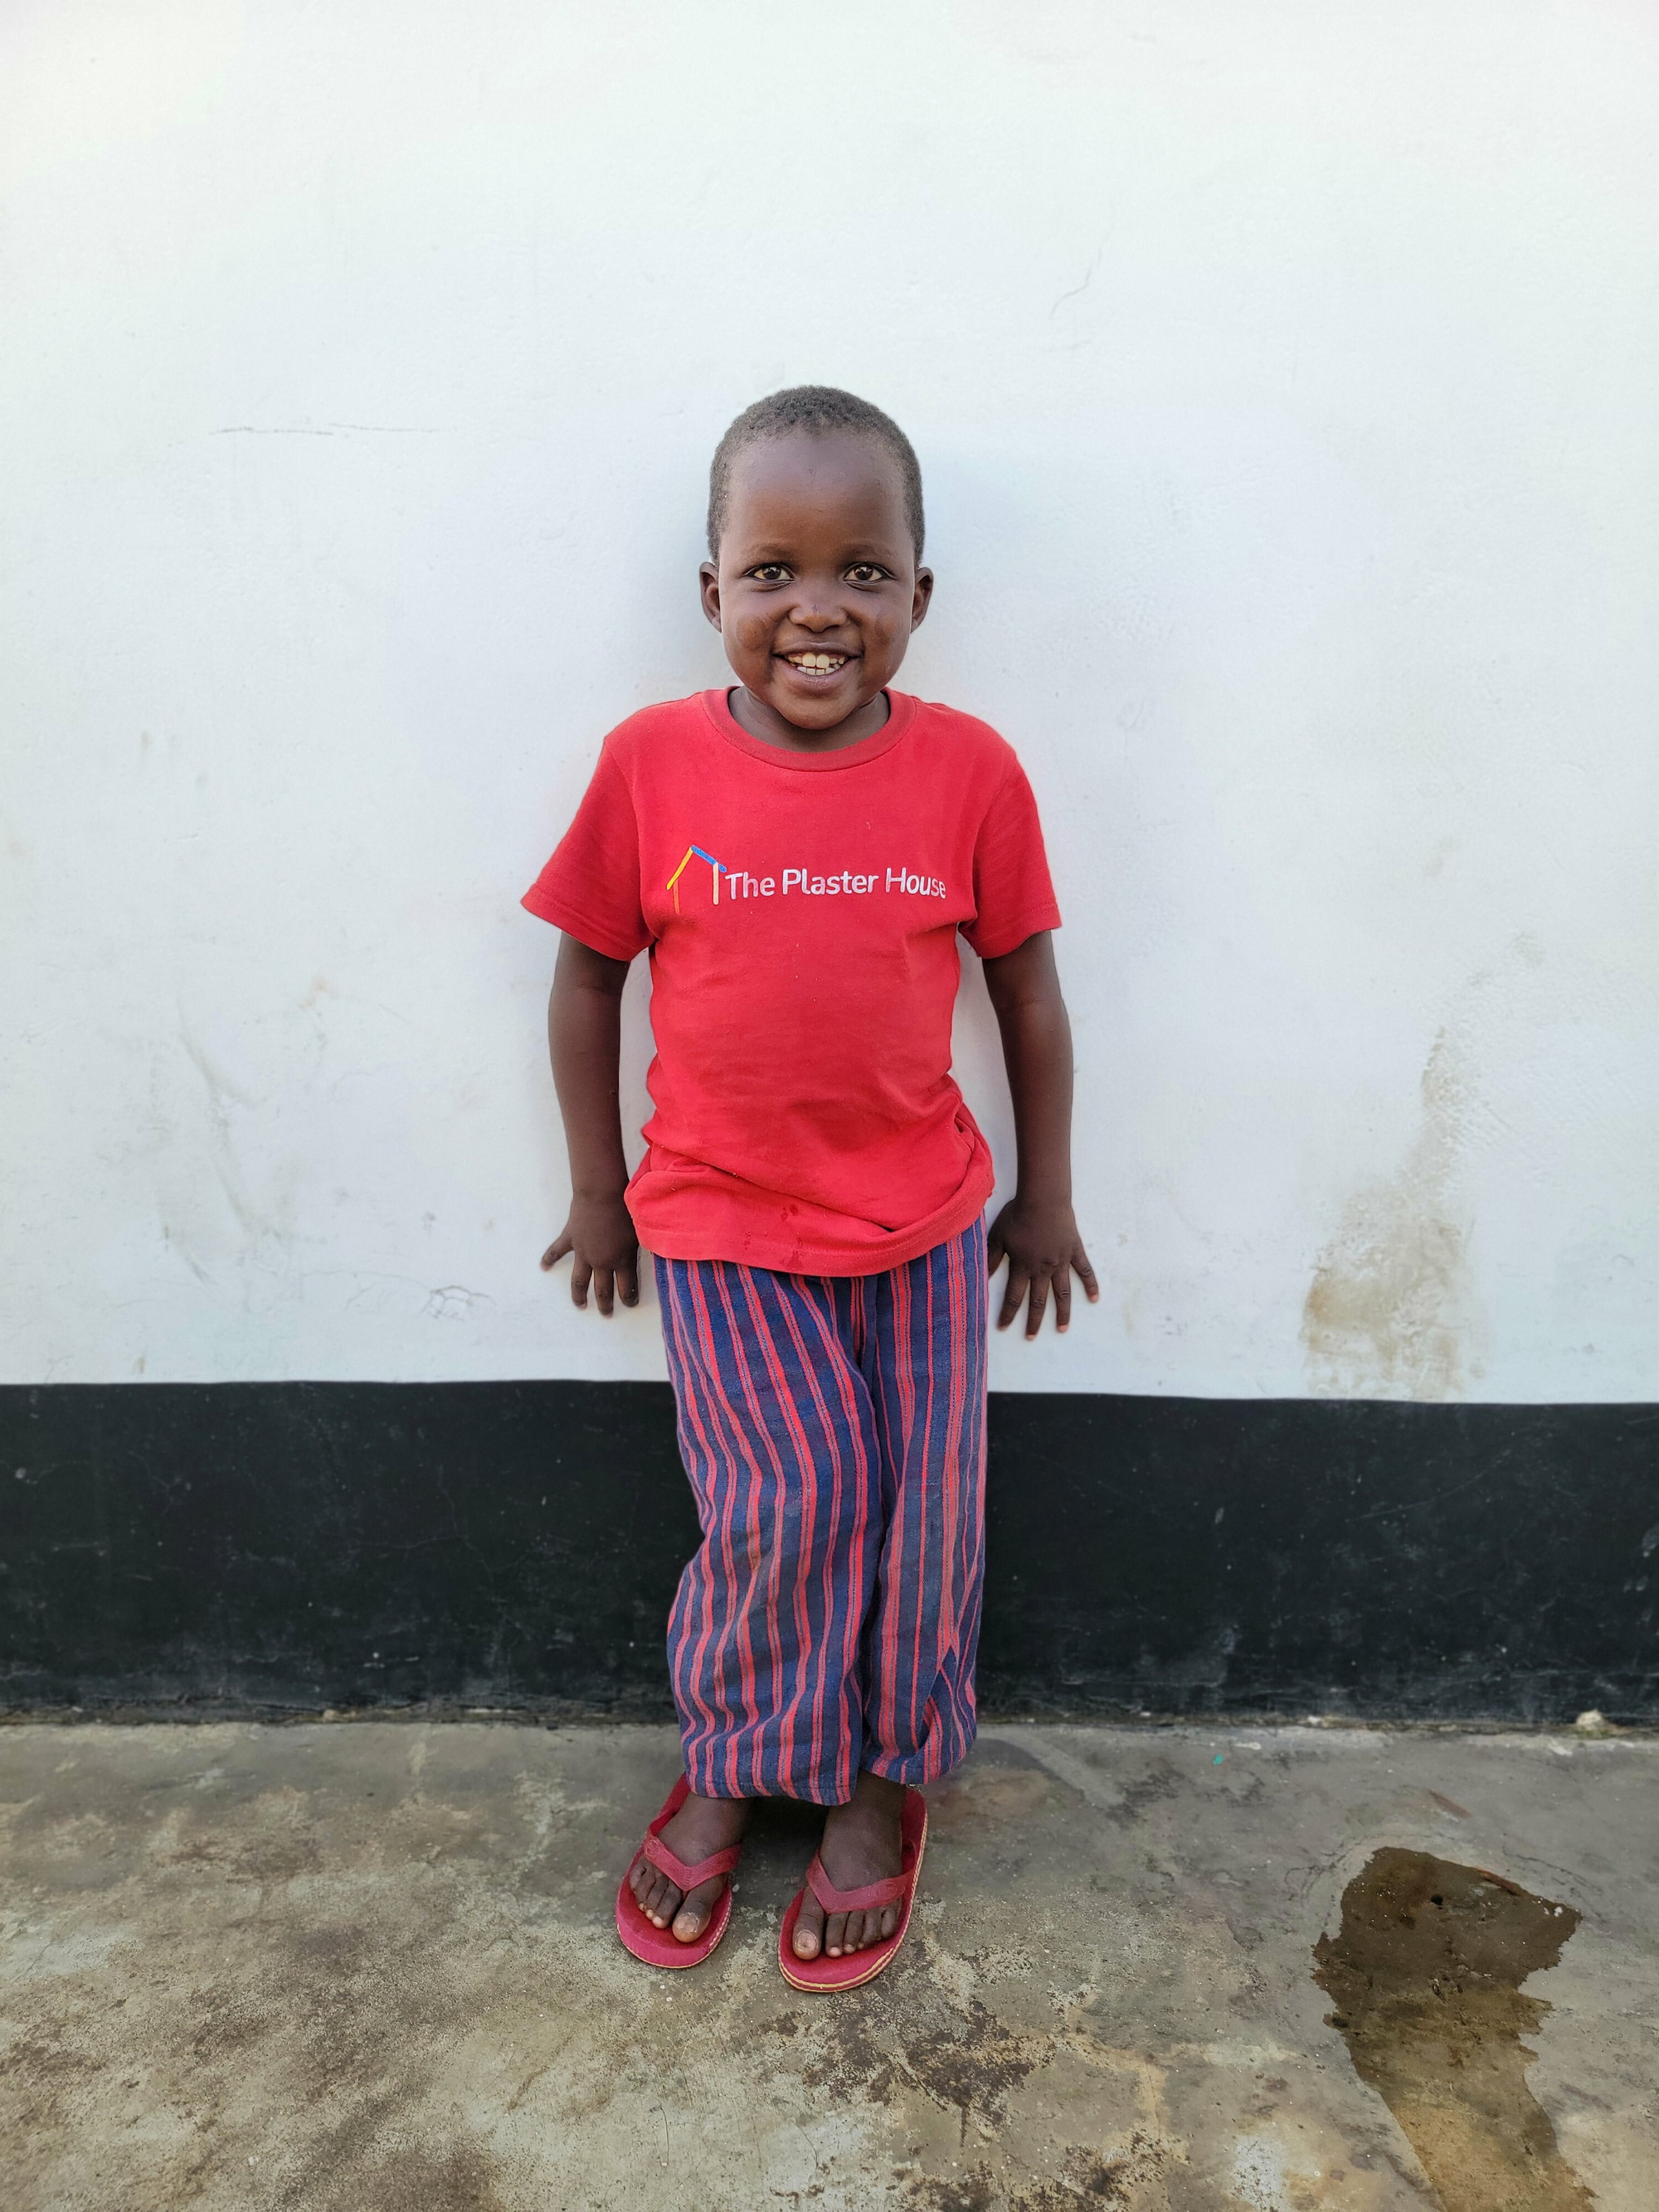 Meet Lawamutwe, a sweet 7-year-old boy from Tanzania, who can now walk and play with his friends because of the generosity of Watsi supporters including the Kerney Family.